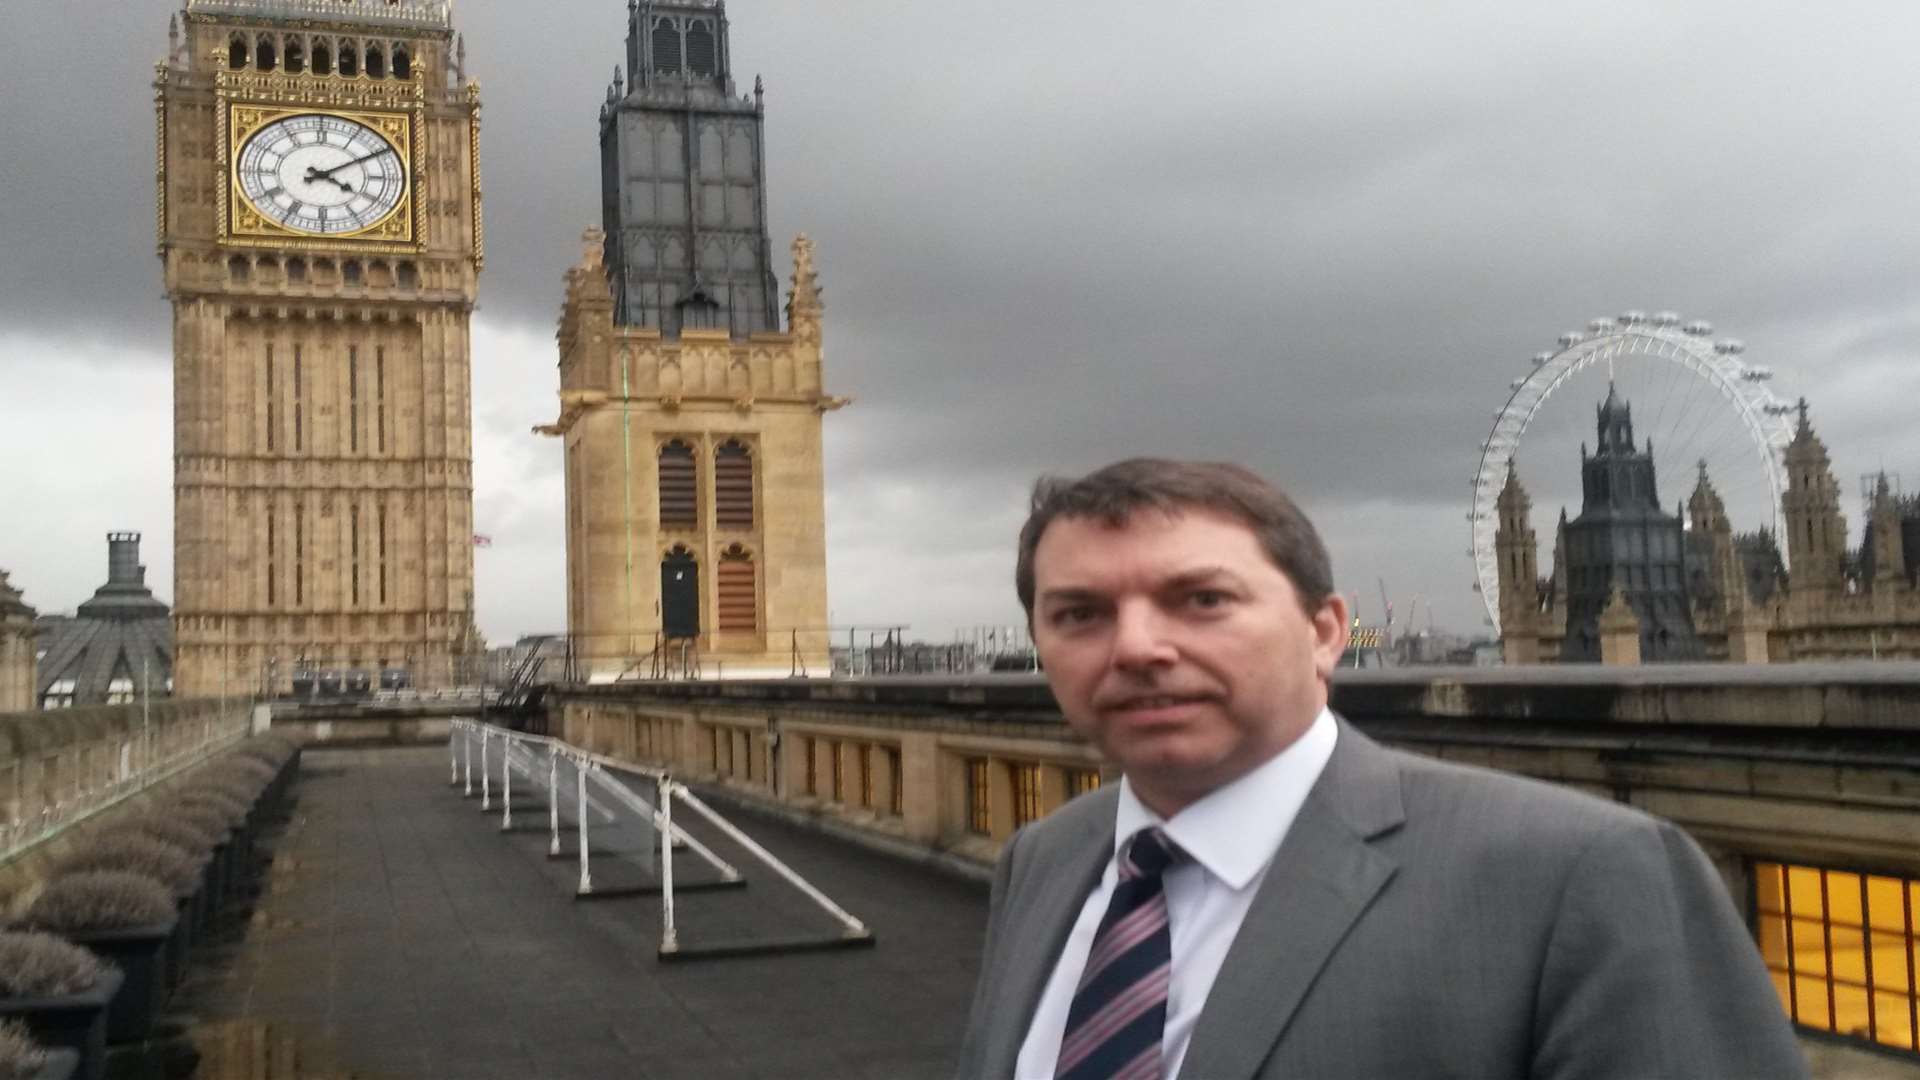 Dartford MP Gareth Johnson has been critical of the Dart Charge in the past